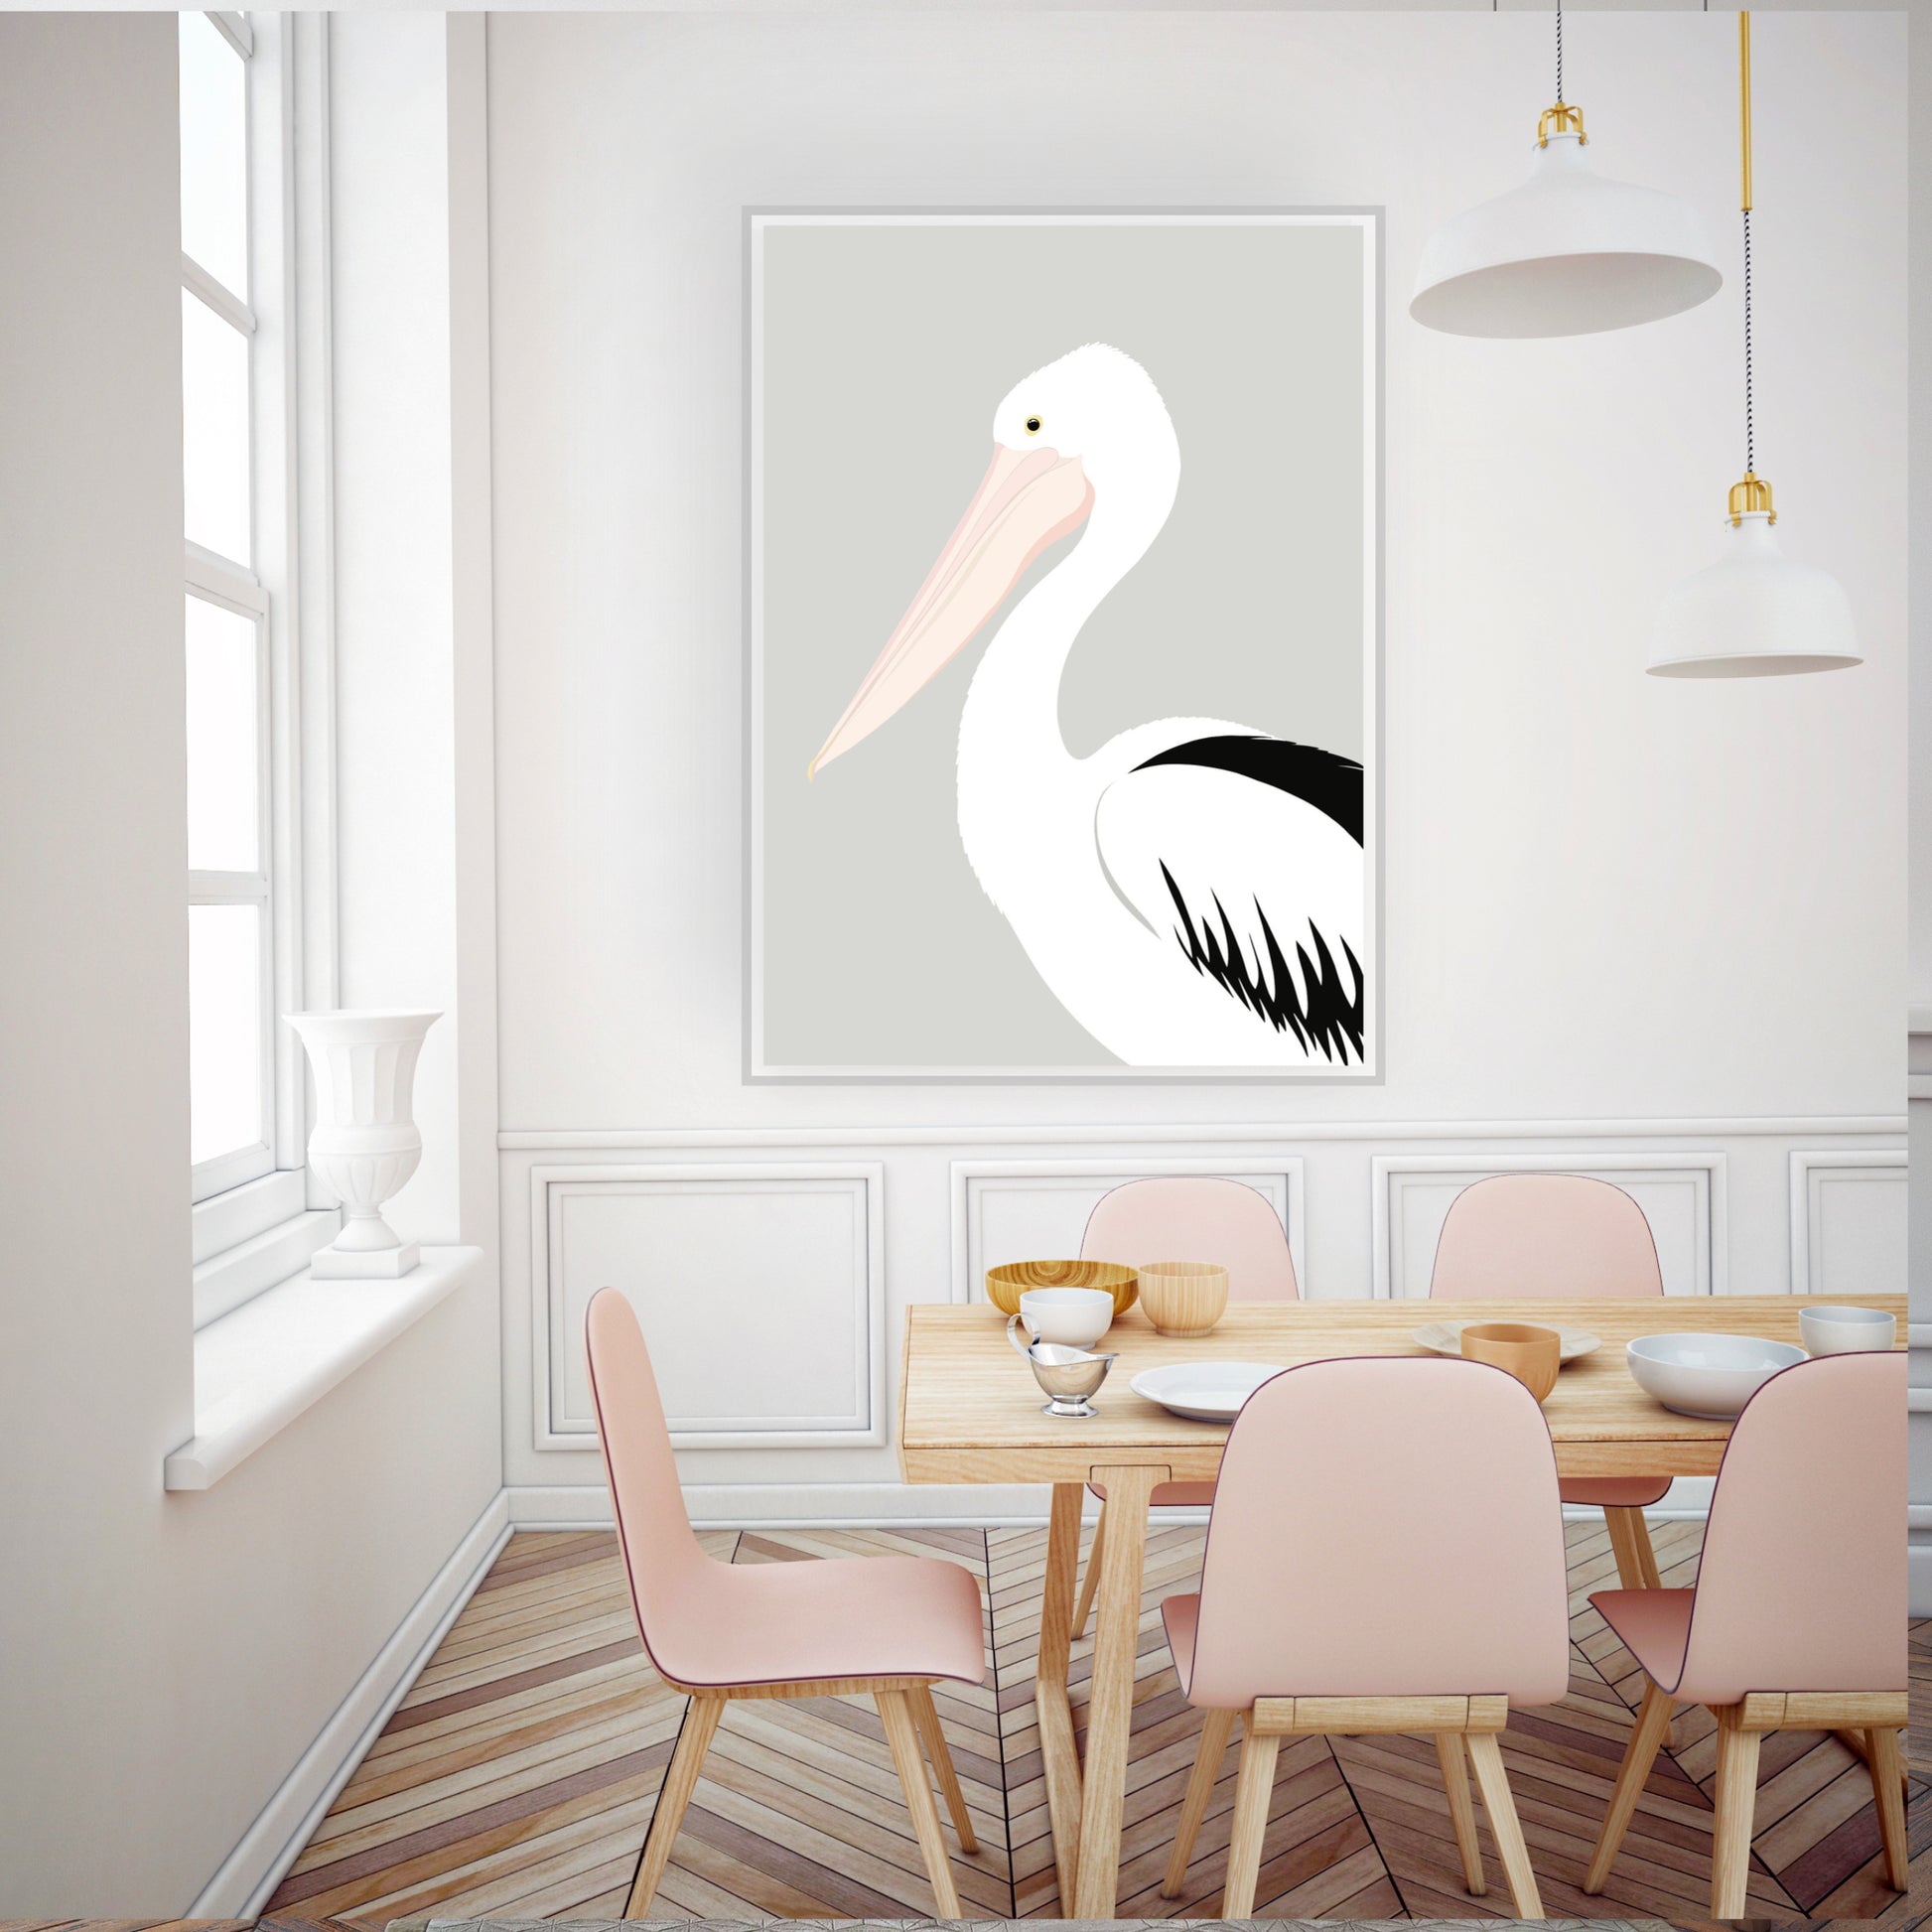 A0 framed art print of the Pelican bird by Hansby Design, New Zealand